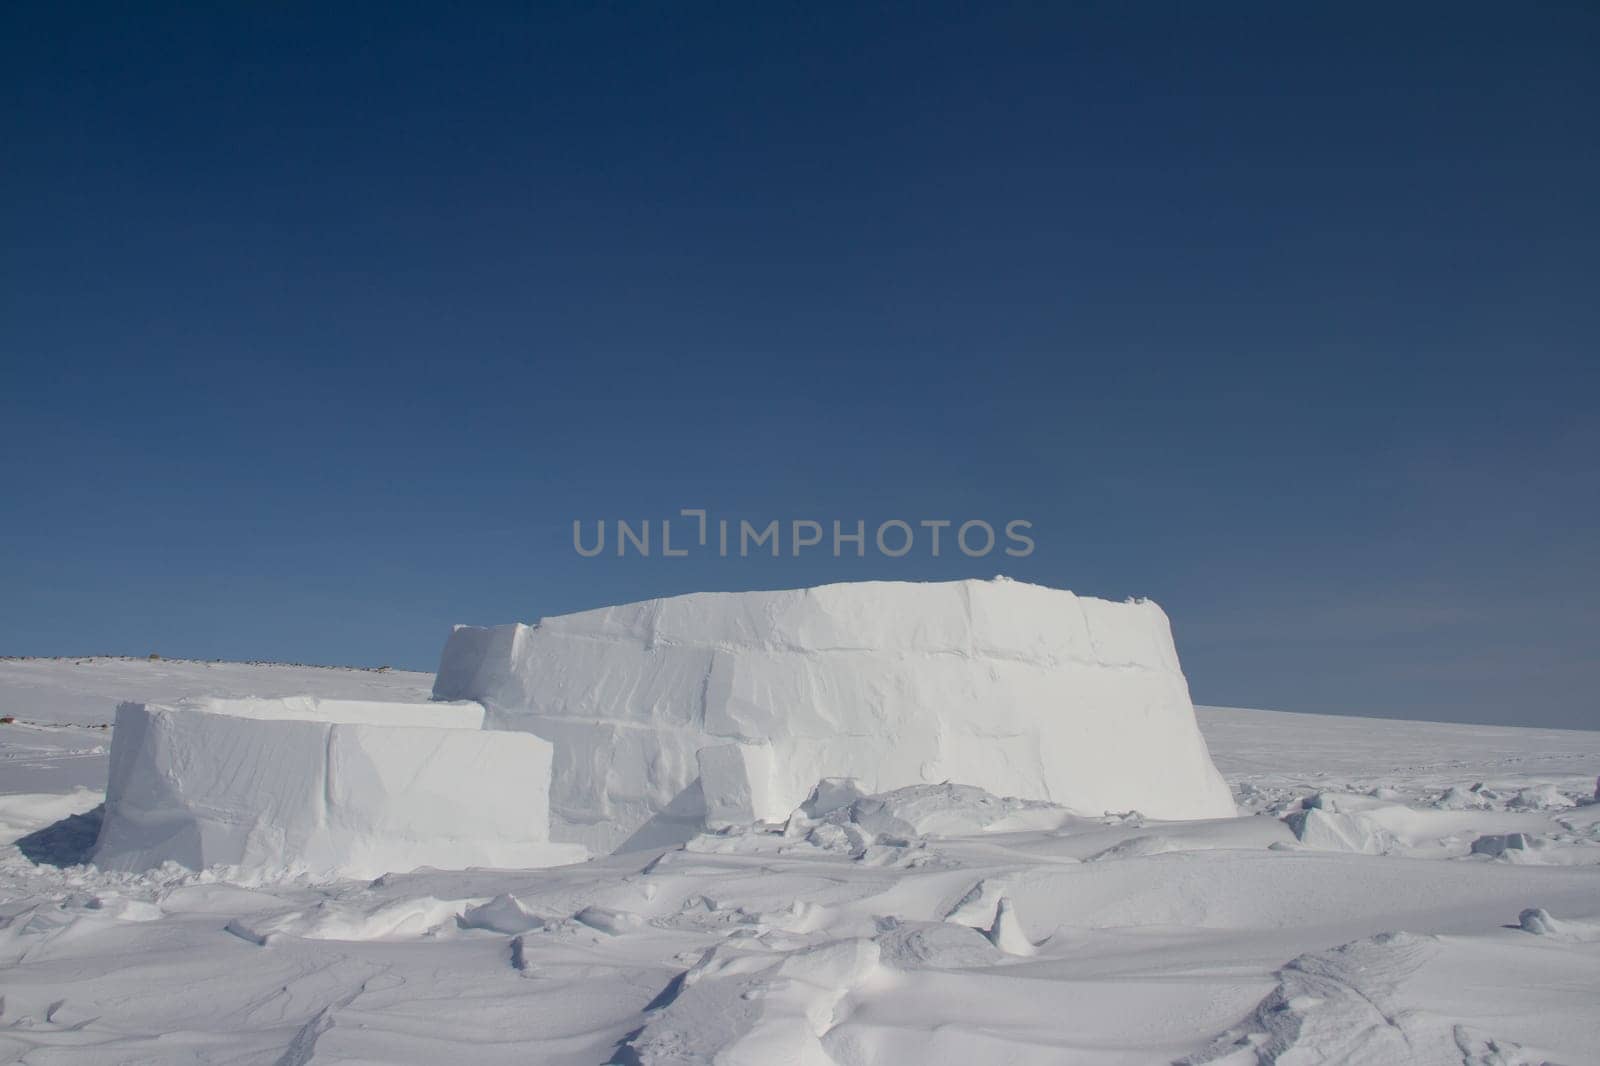 The beginnings of an igloo, a snow shelter from the harsh winter elements. by Granchinho